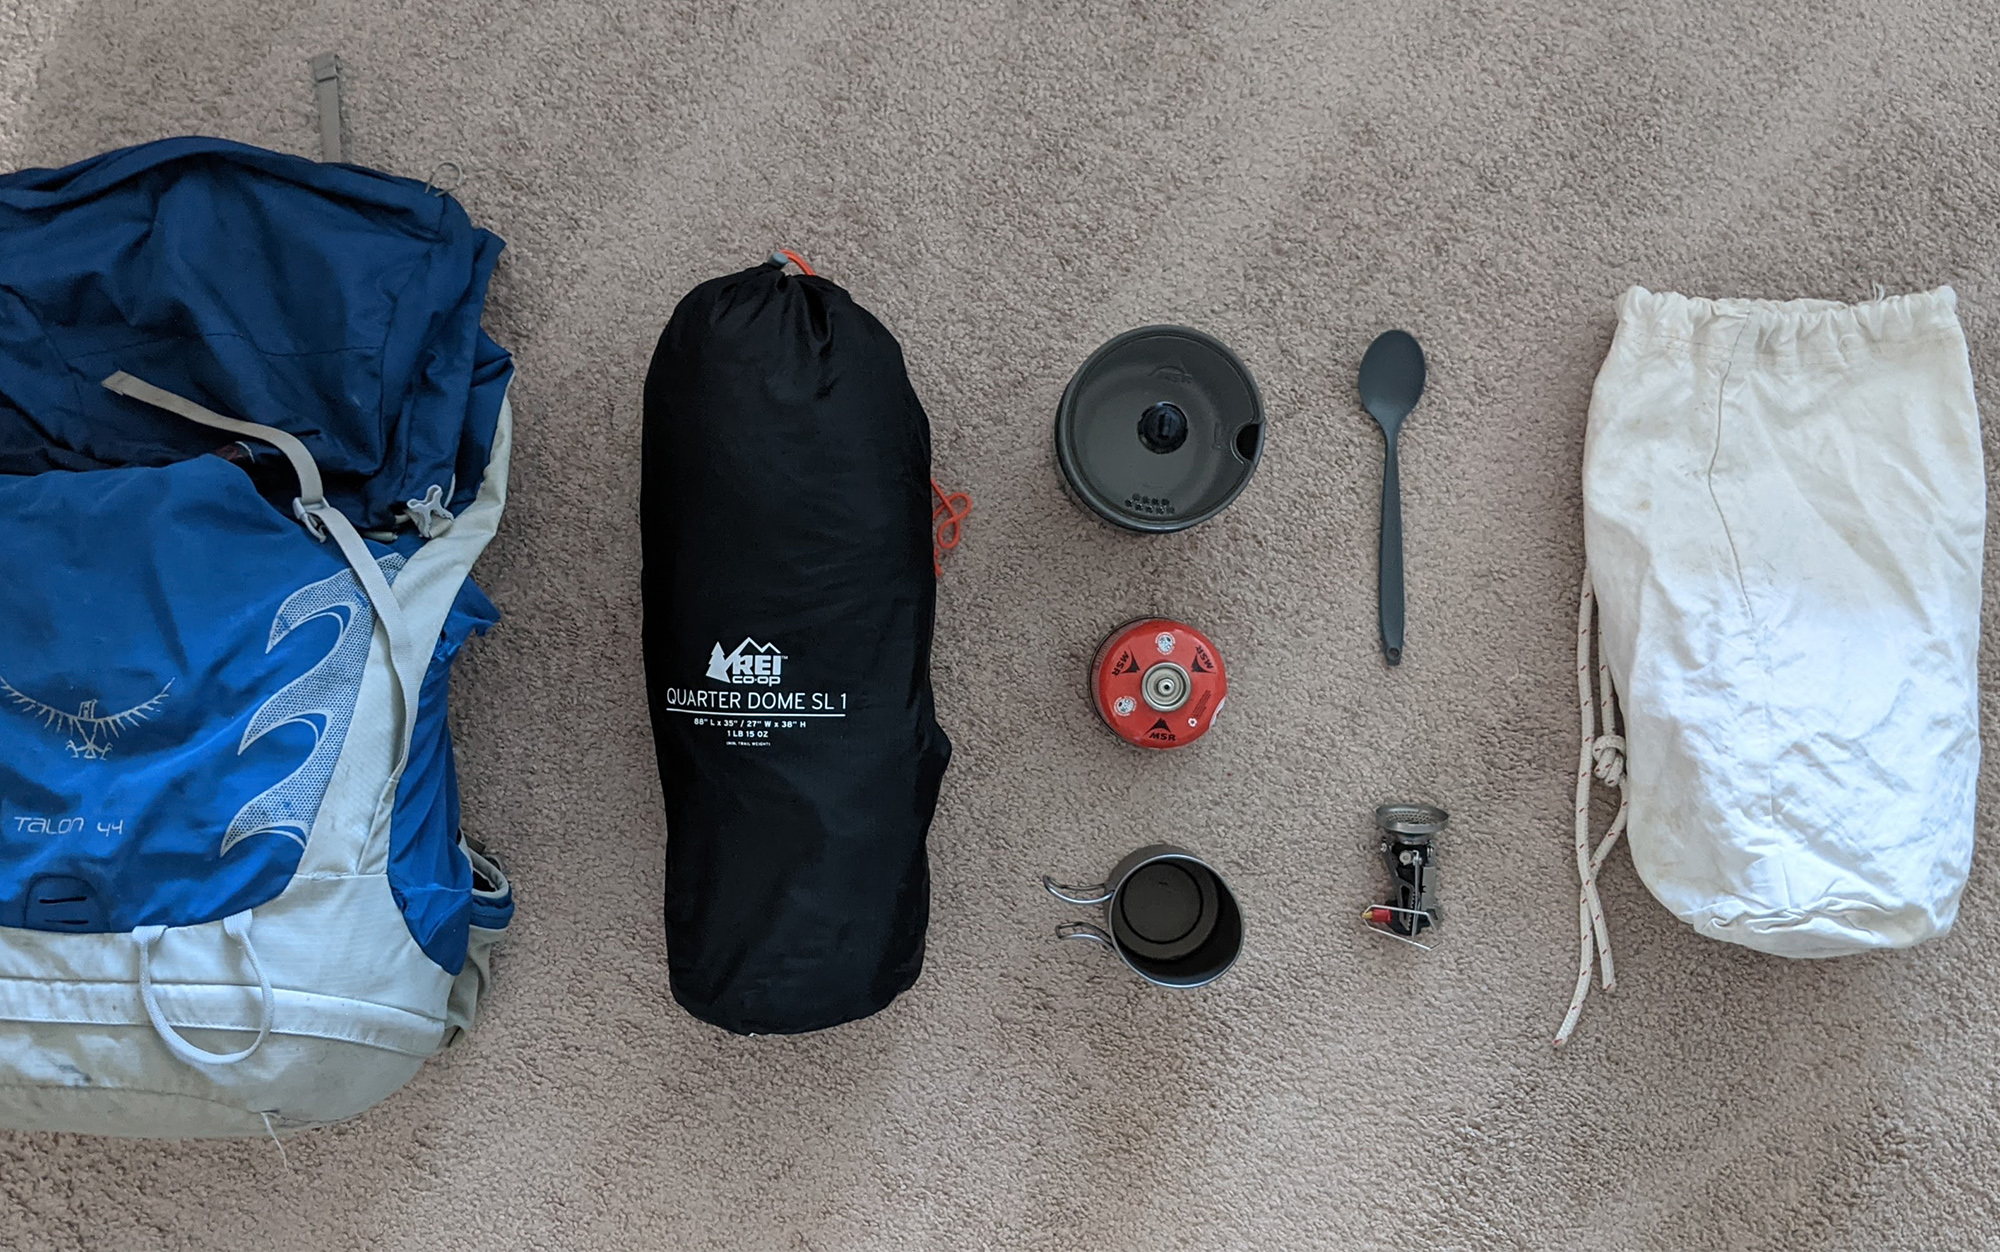 Tent, cooking supplies, and food bag go in the middle of your backpack.